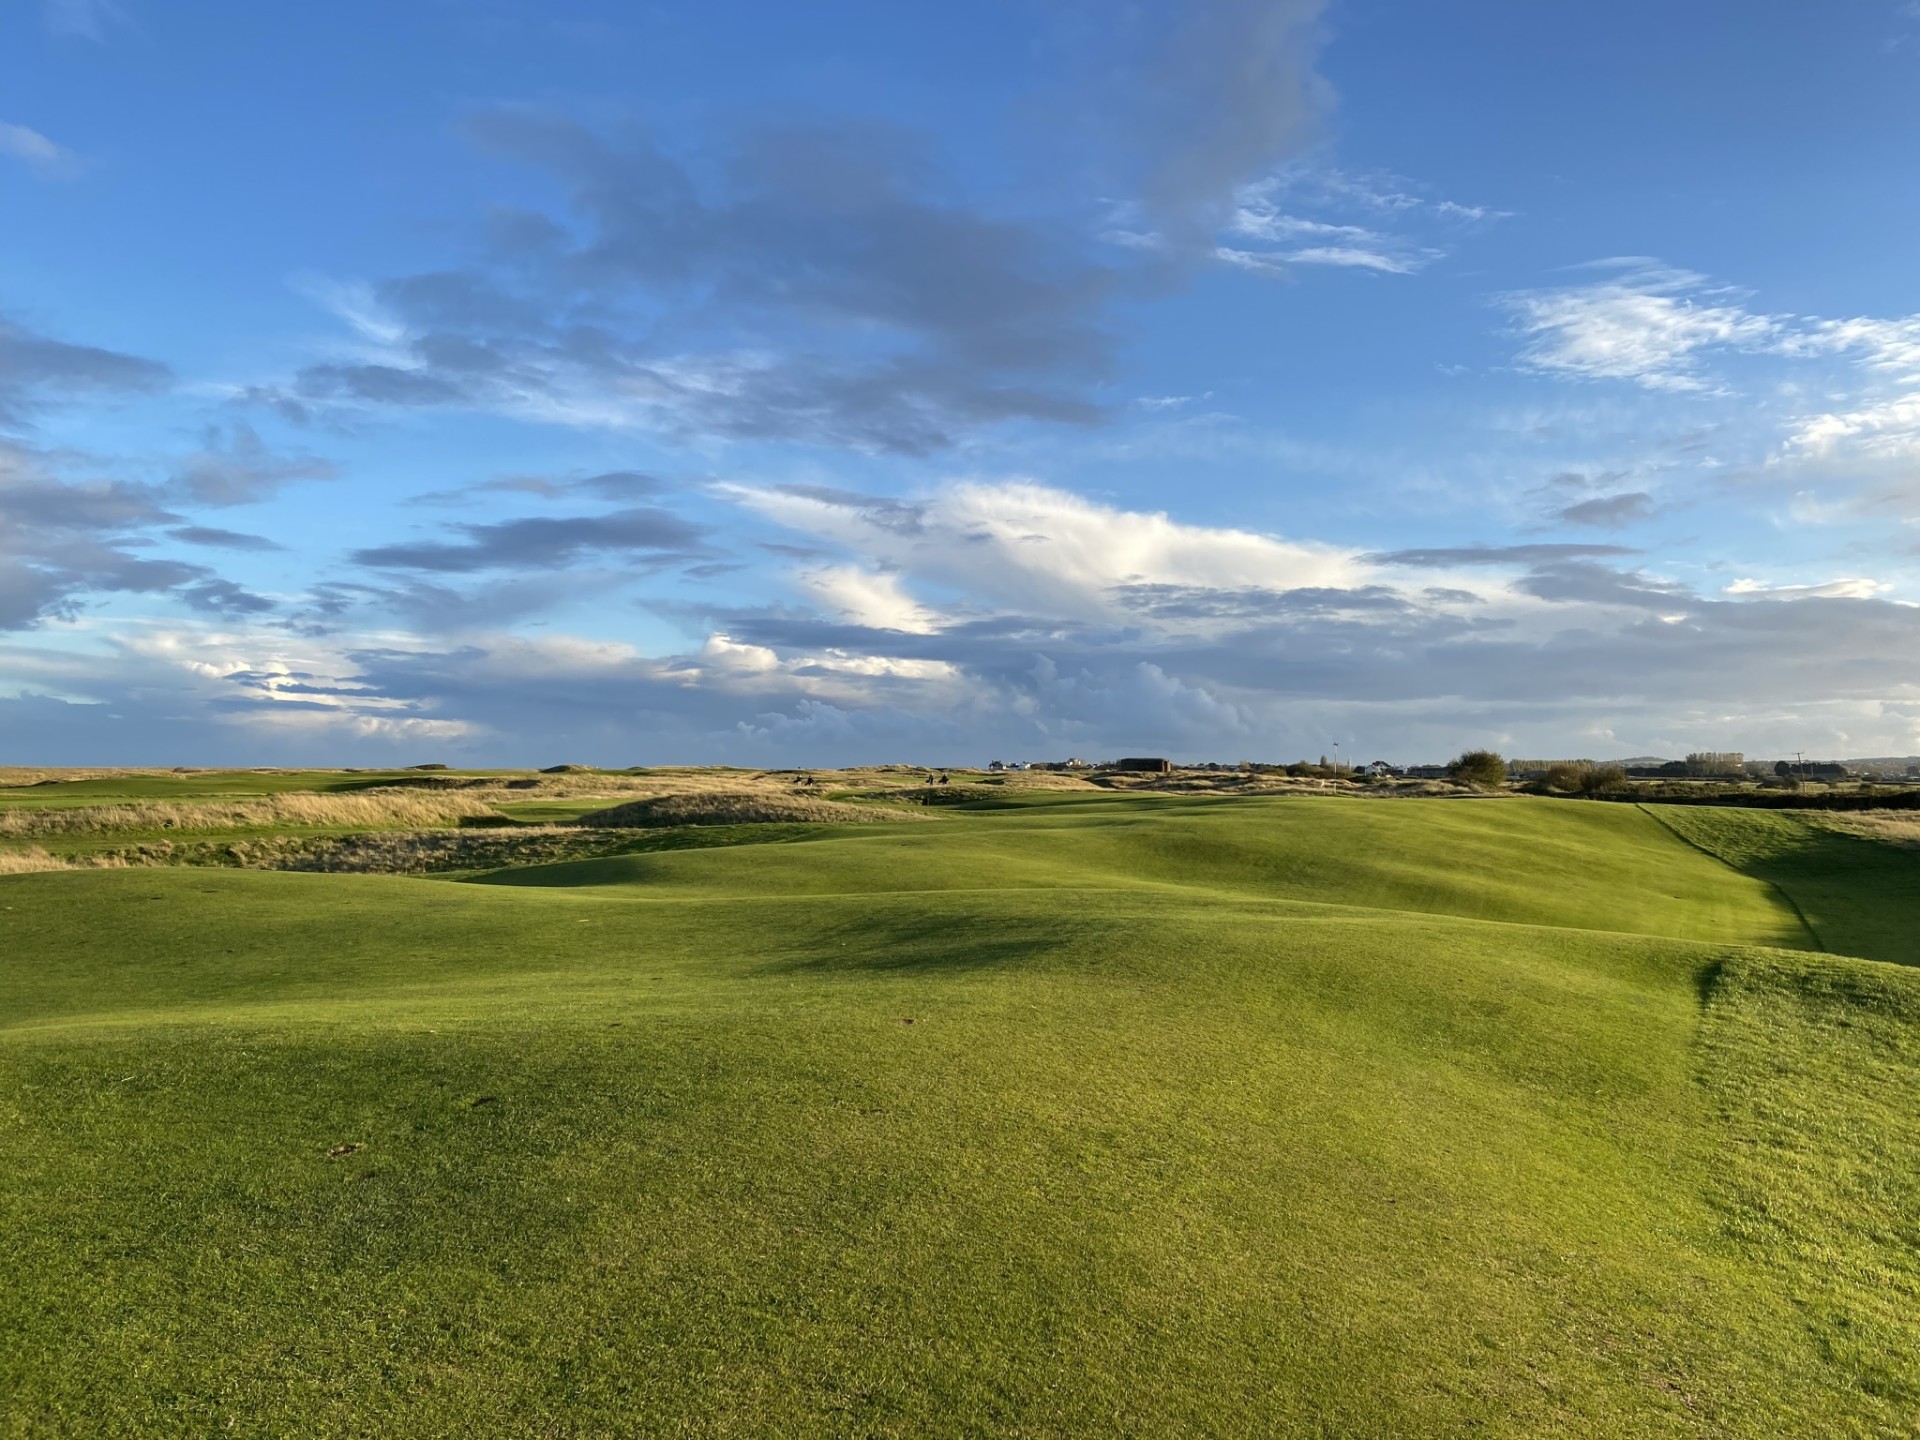 The links course at Royal Cinque Ports was the setting for The Open Championship in 1909 and 1920.